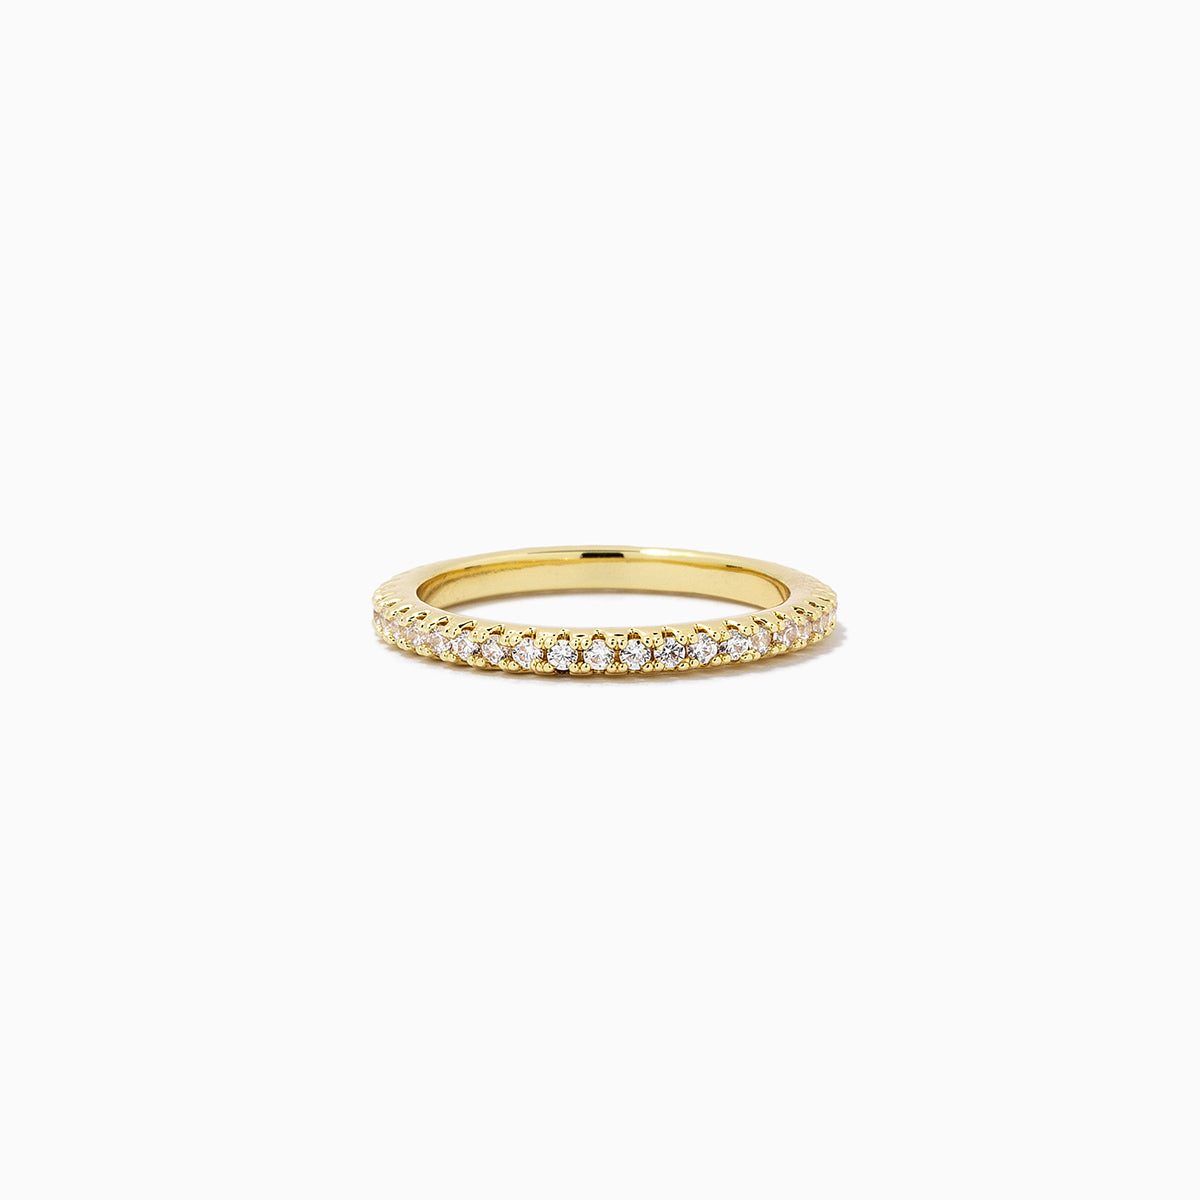 Glow Ring | Gold | Product Image | Uncommon James